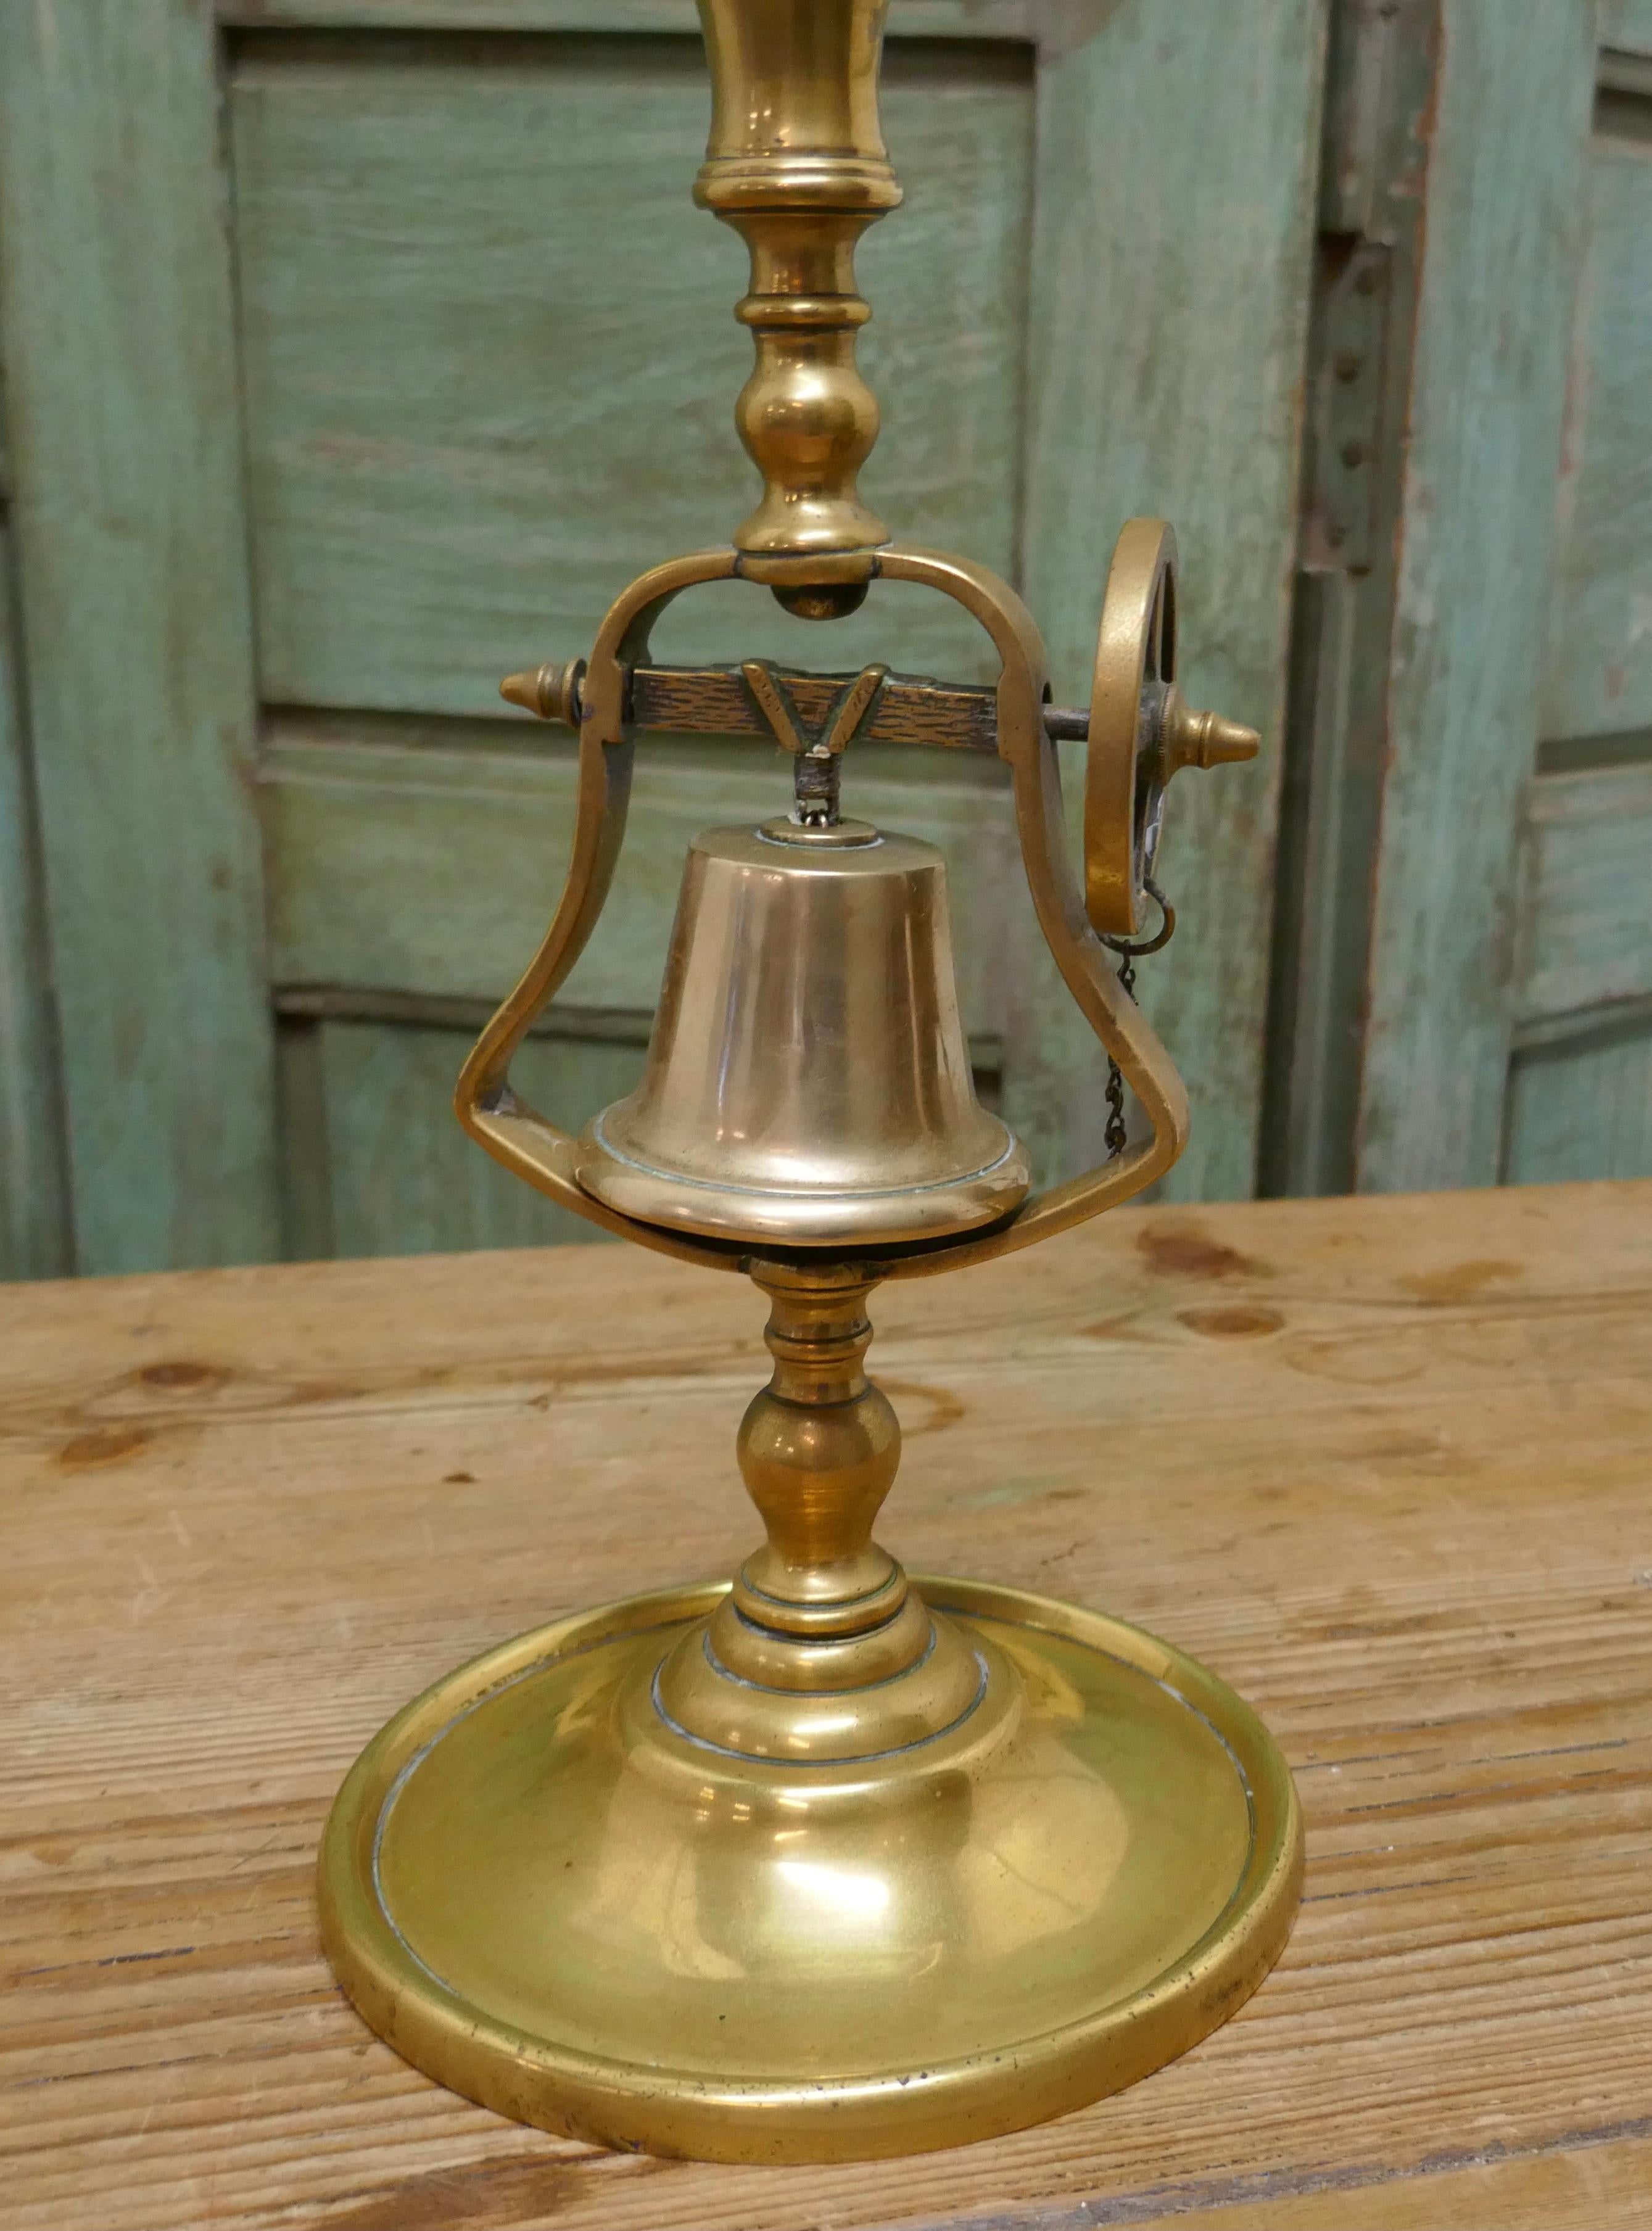 A 19th century brass candlestick with gimbal bell

A great little piece, in good condition for its age, just turn the wheel to ring the bell

The candlestick is 12” tall. The base is 6” in diameter
TGB254.